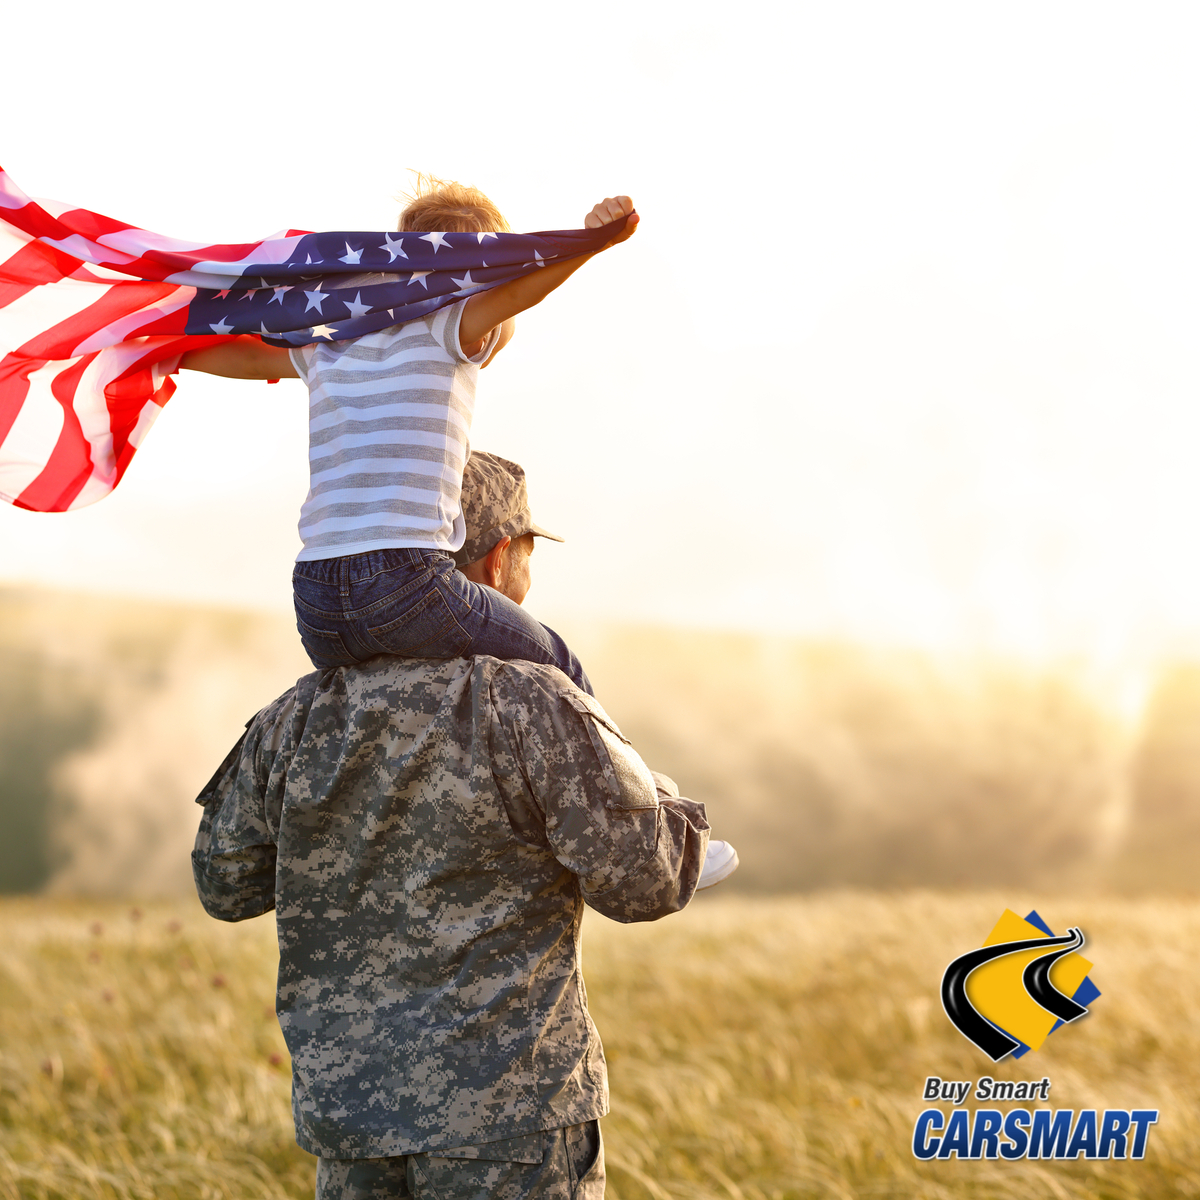 Do Active Military Members Qualify for Military Auto Loans Near Arlington?